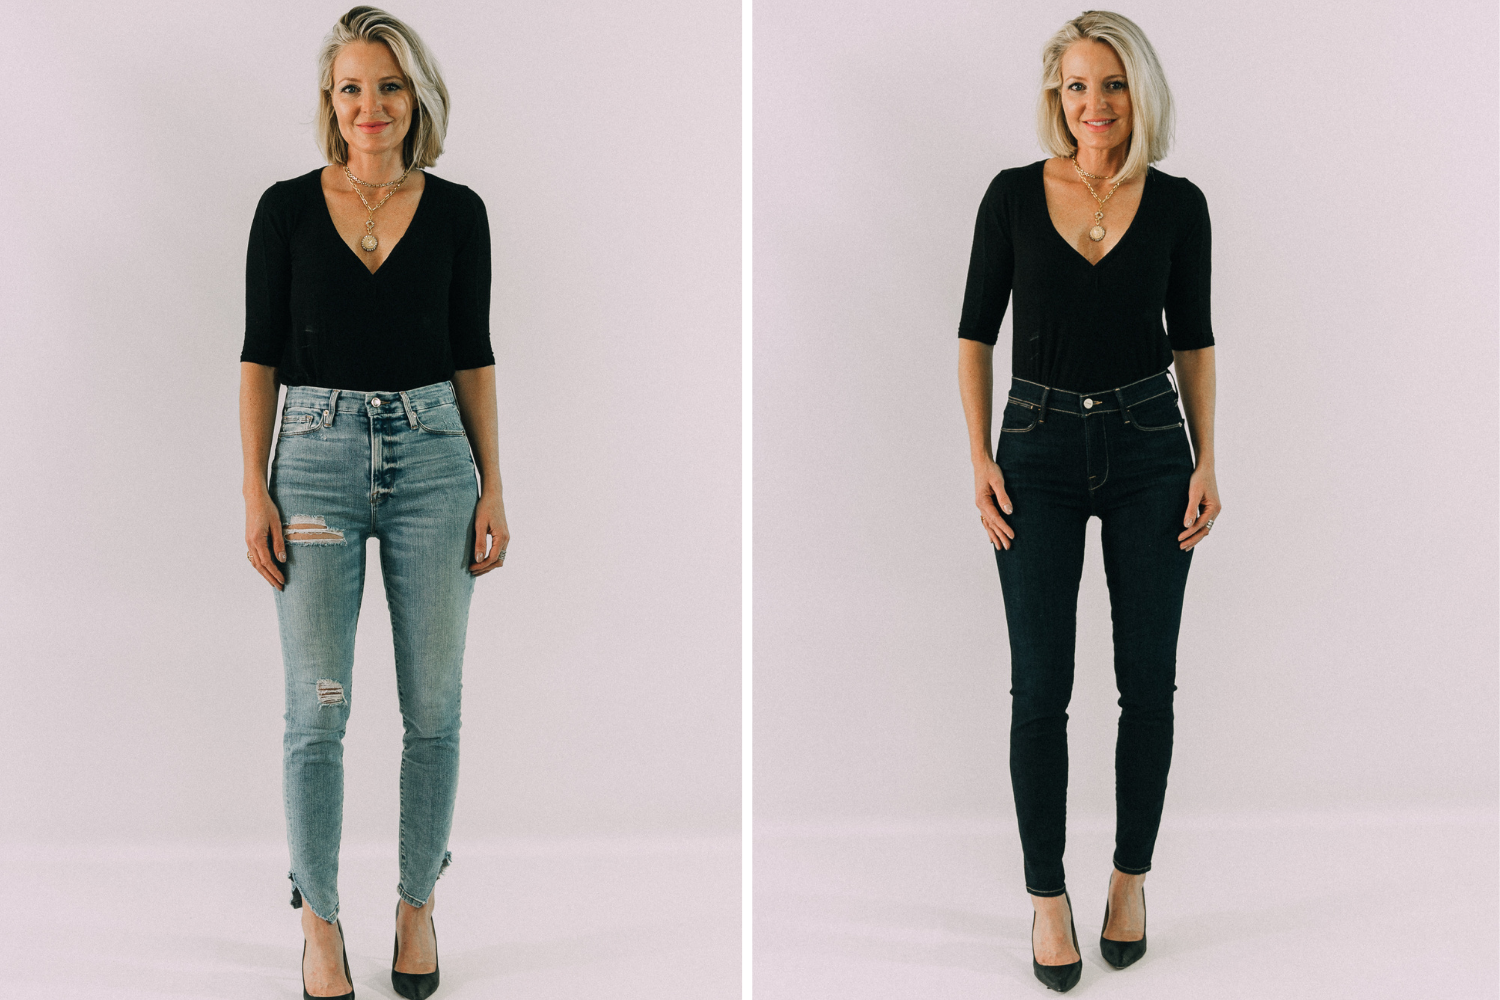 4 Fashion tips to look taller and slimmer